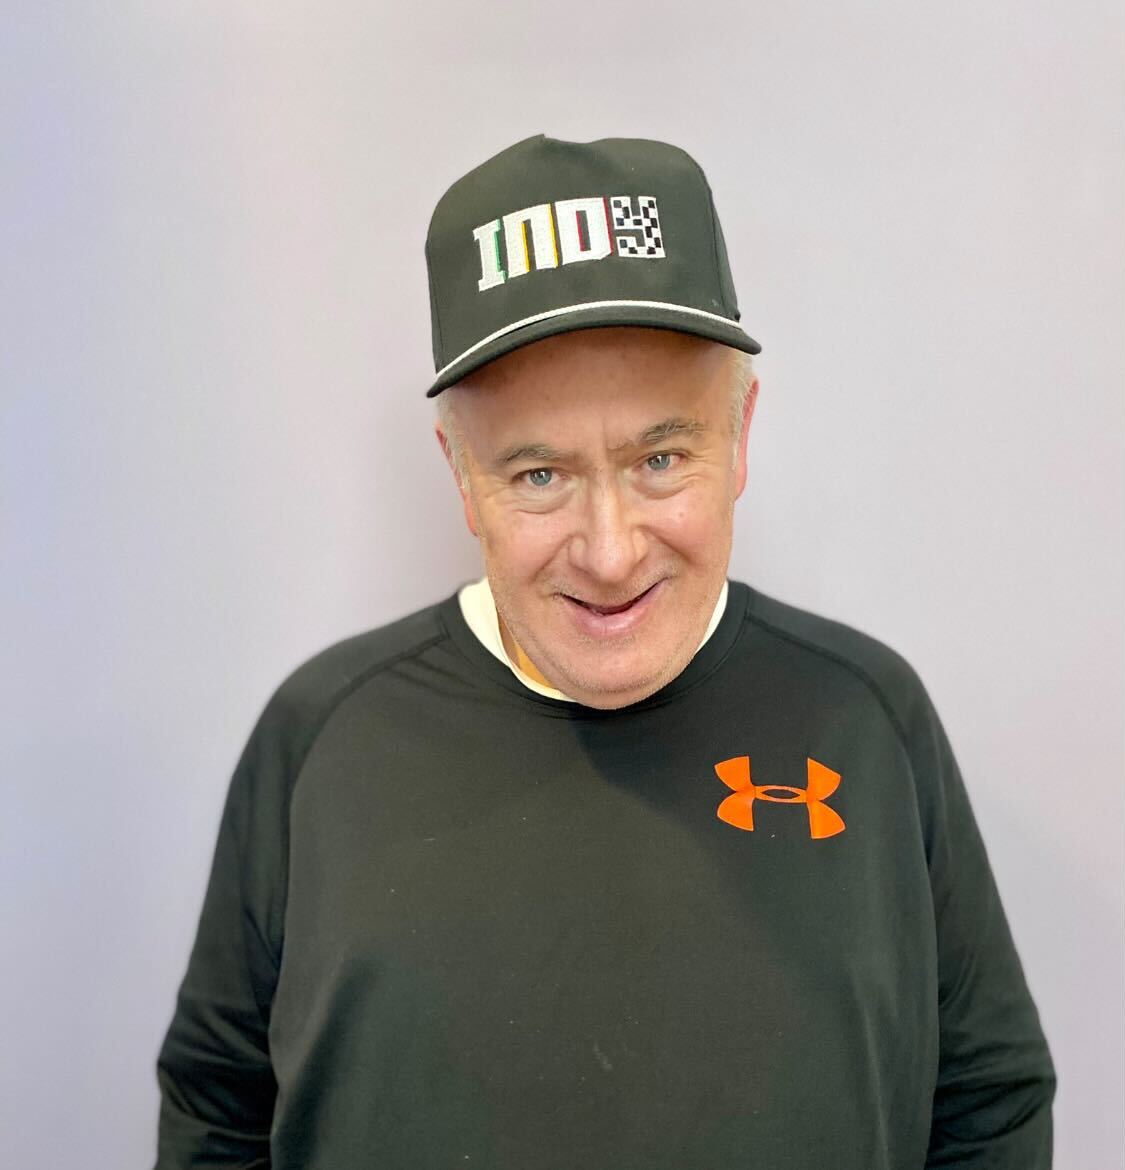 Village of Merici resident Marty Davenport wearing The Black Indy Hat